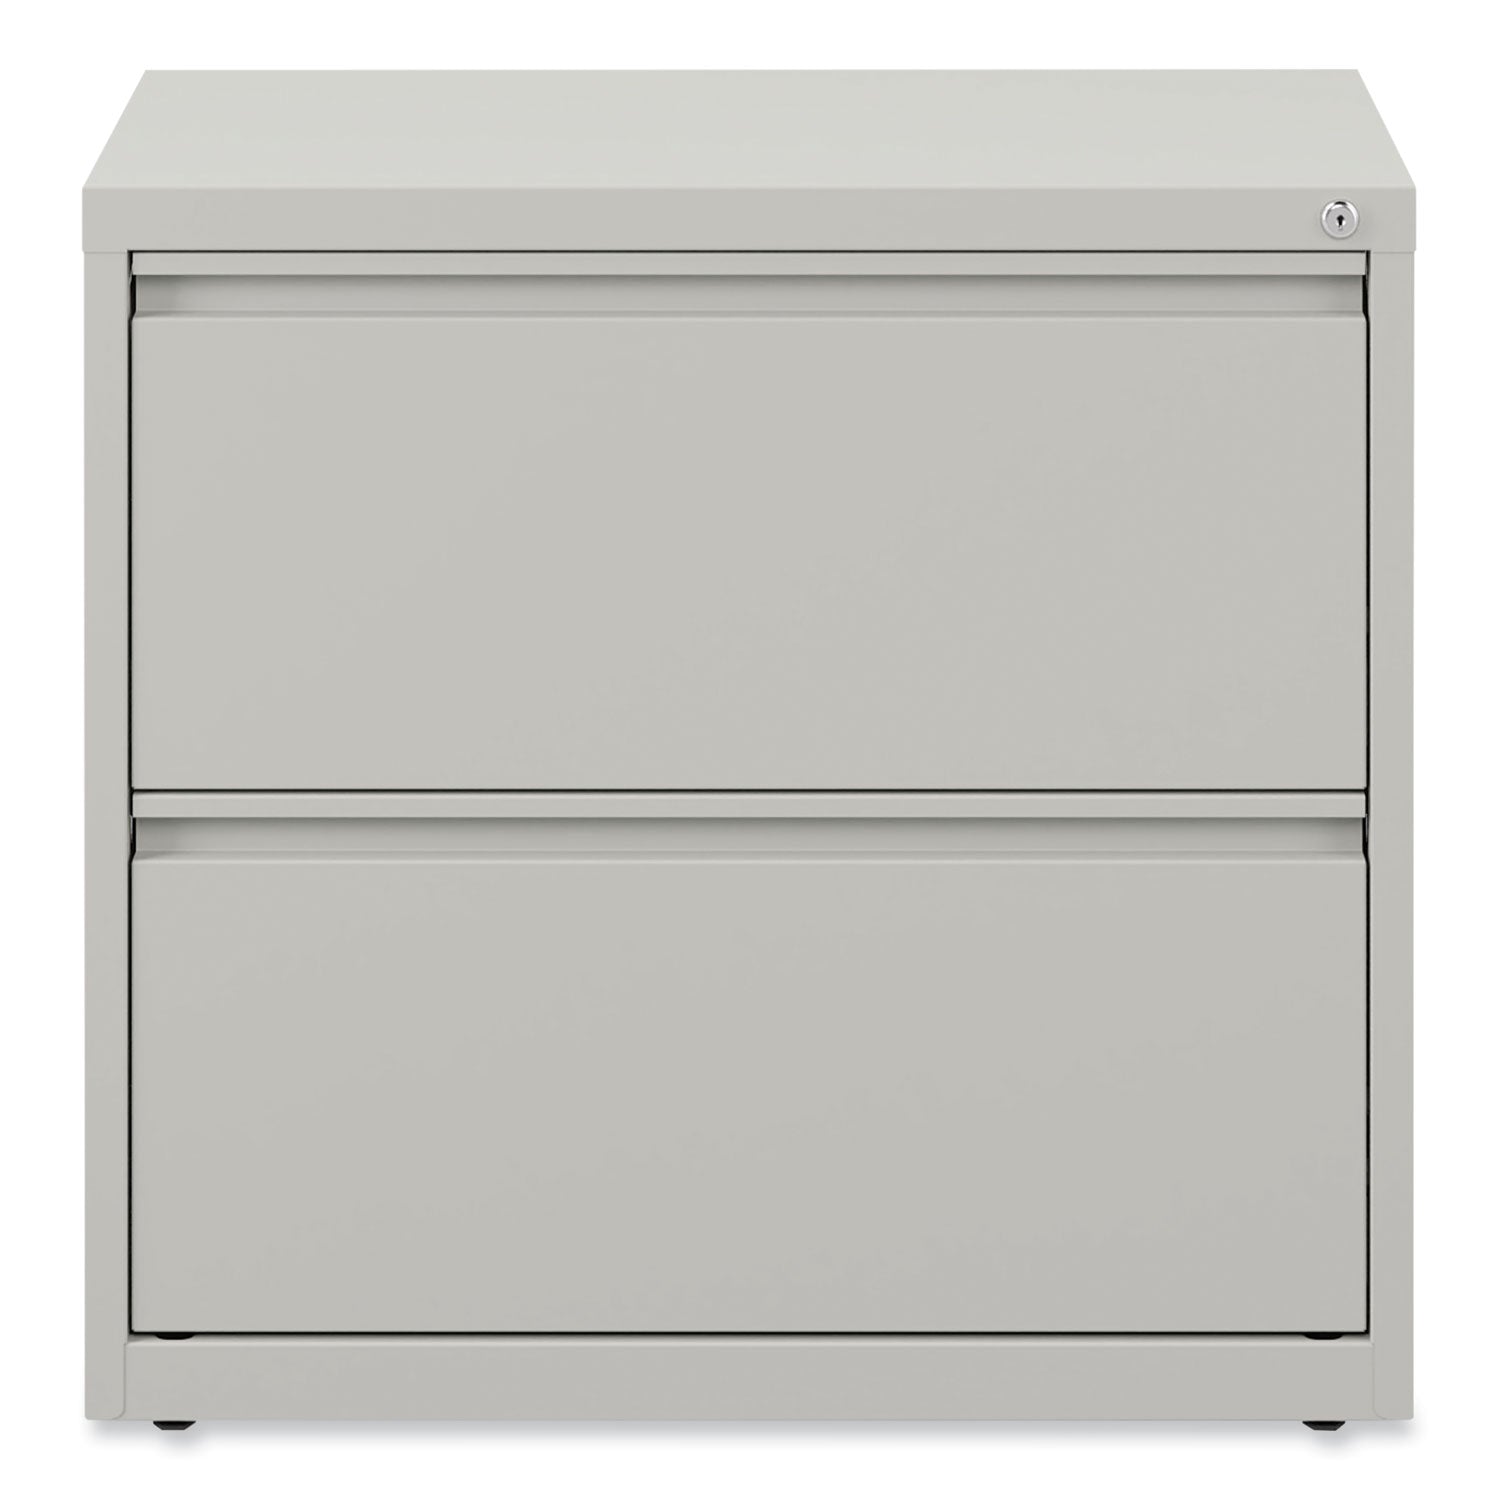 lateral-file-2-legal-letter-size-file-drawers-light-gray-36-x-1863-x-28_alehlf3029lg - 1